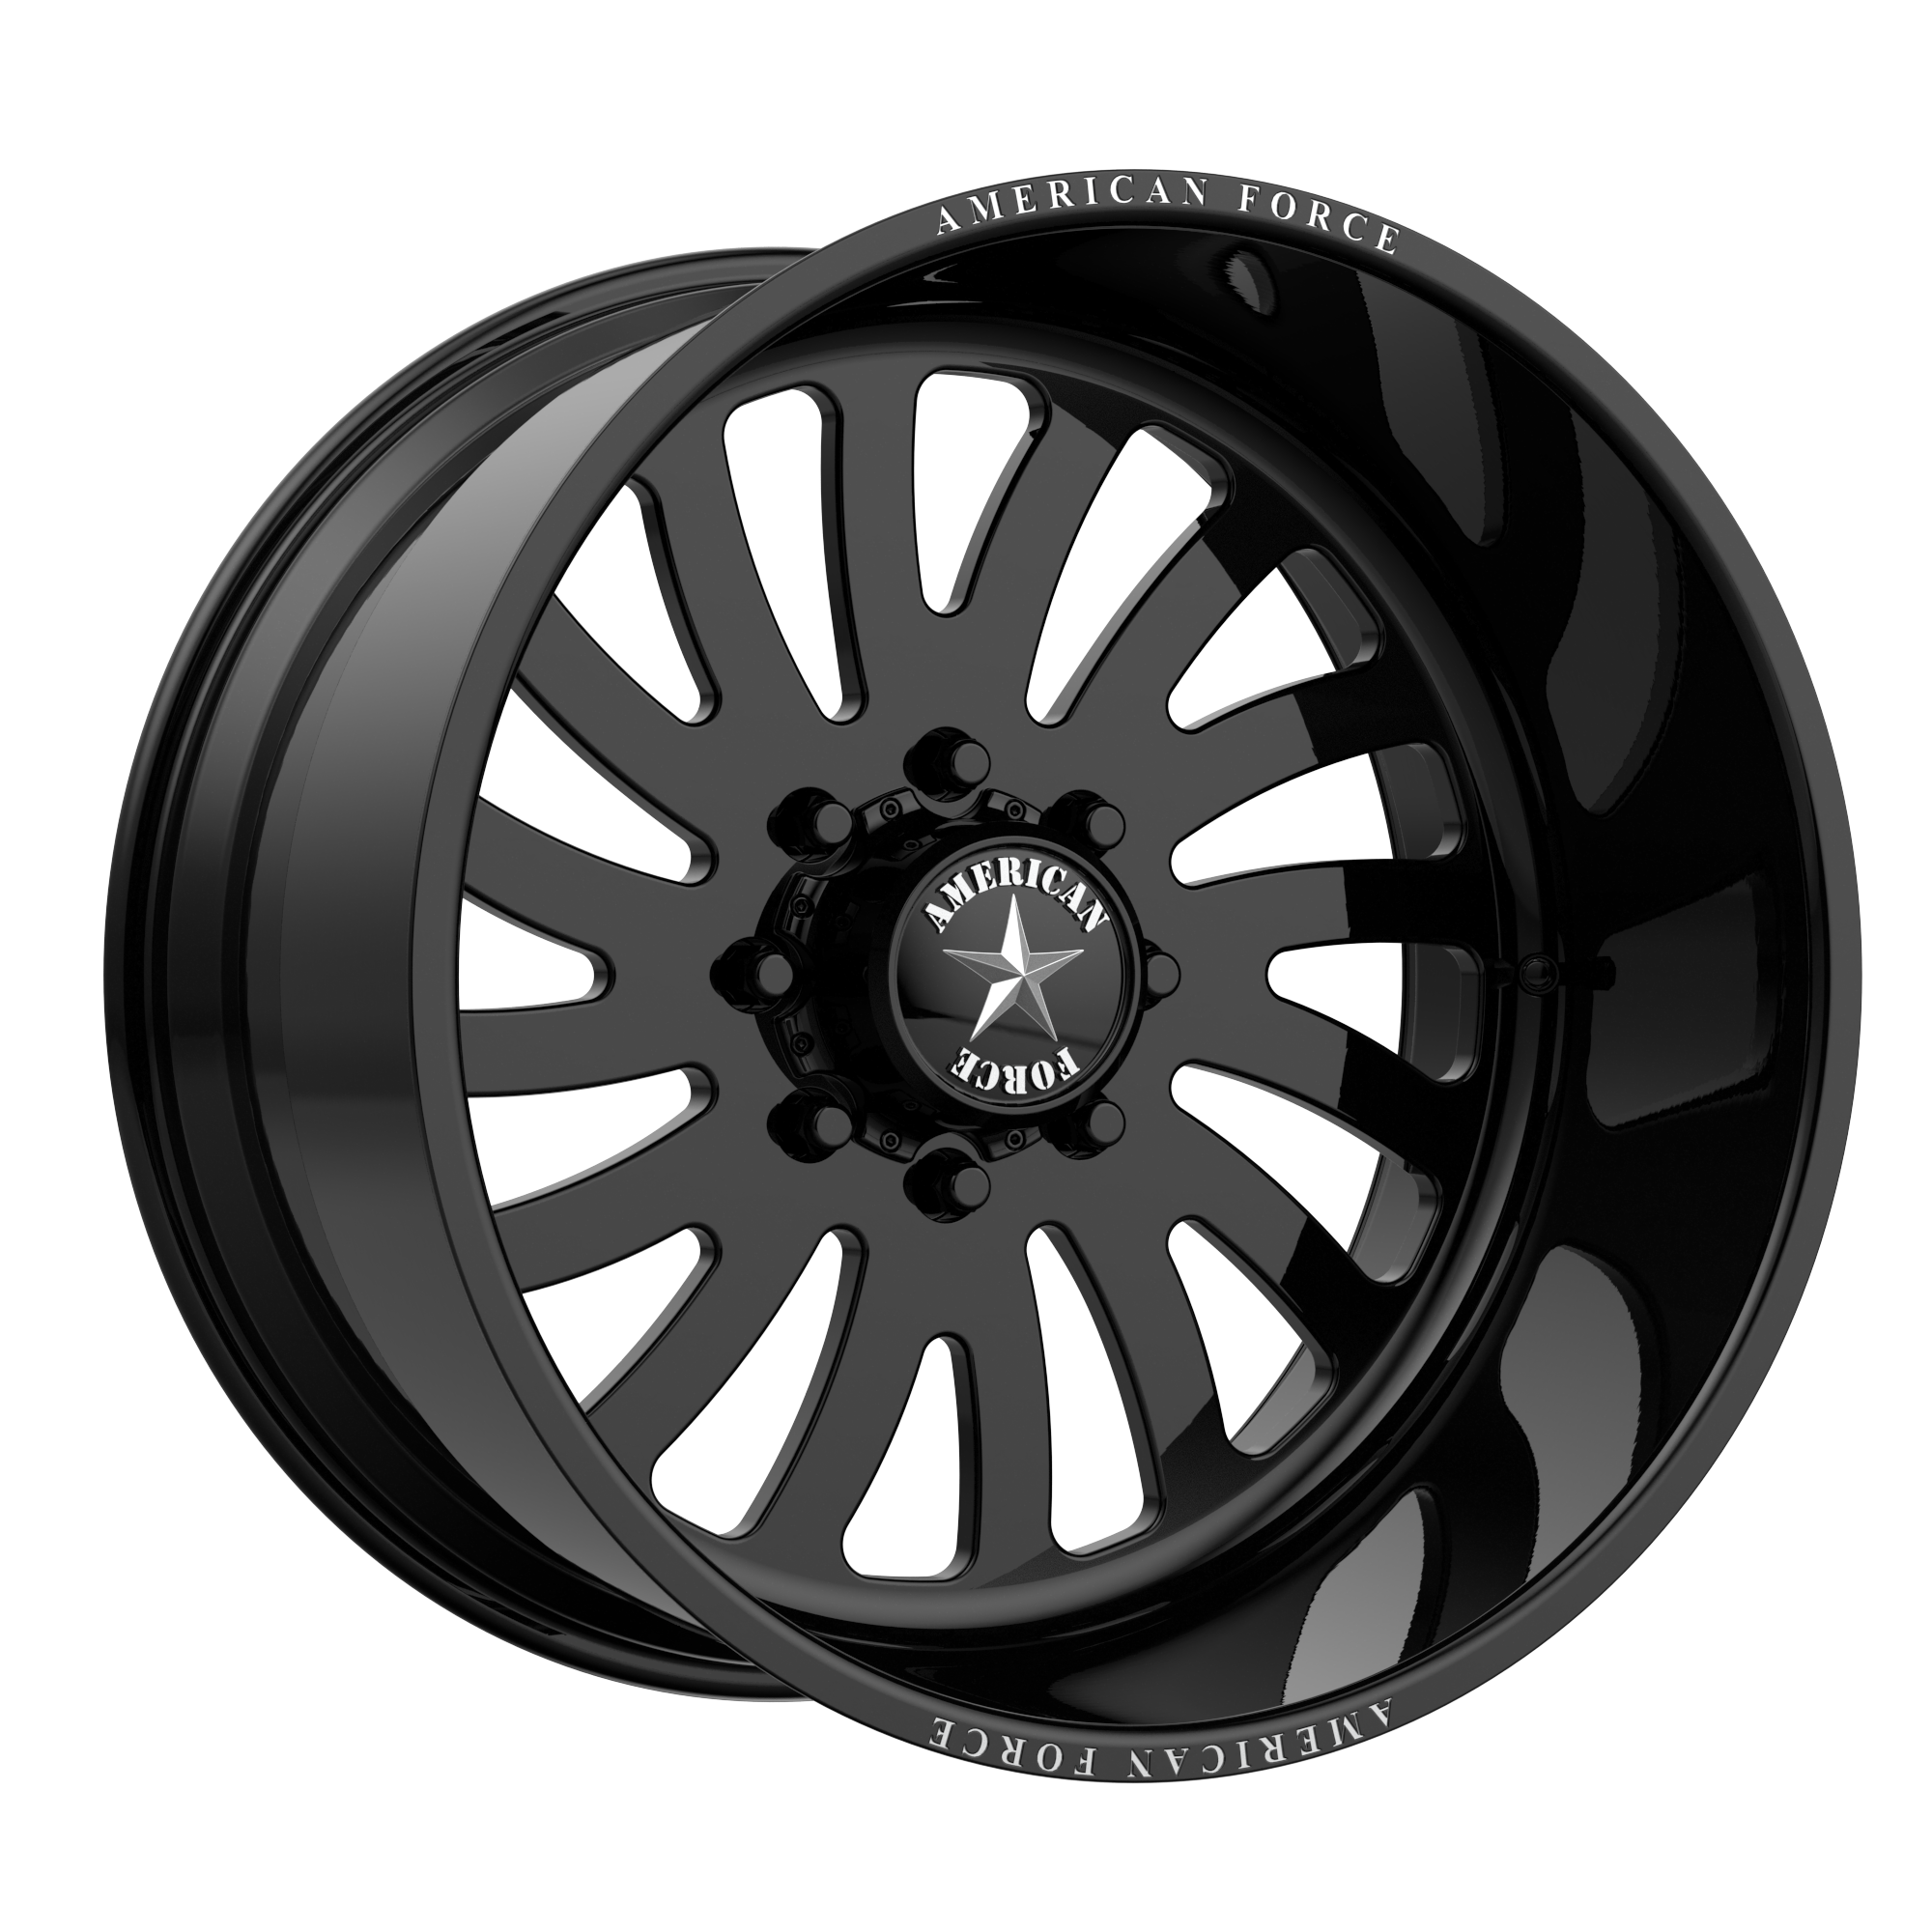 OCTANE SS 22x16 8x180.00 GLOSS BLACK MACHINED (-99 mm) - Tires and Engine Performance